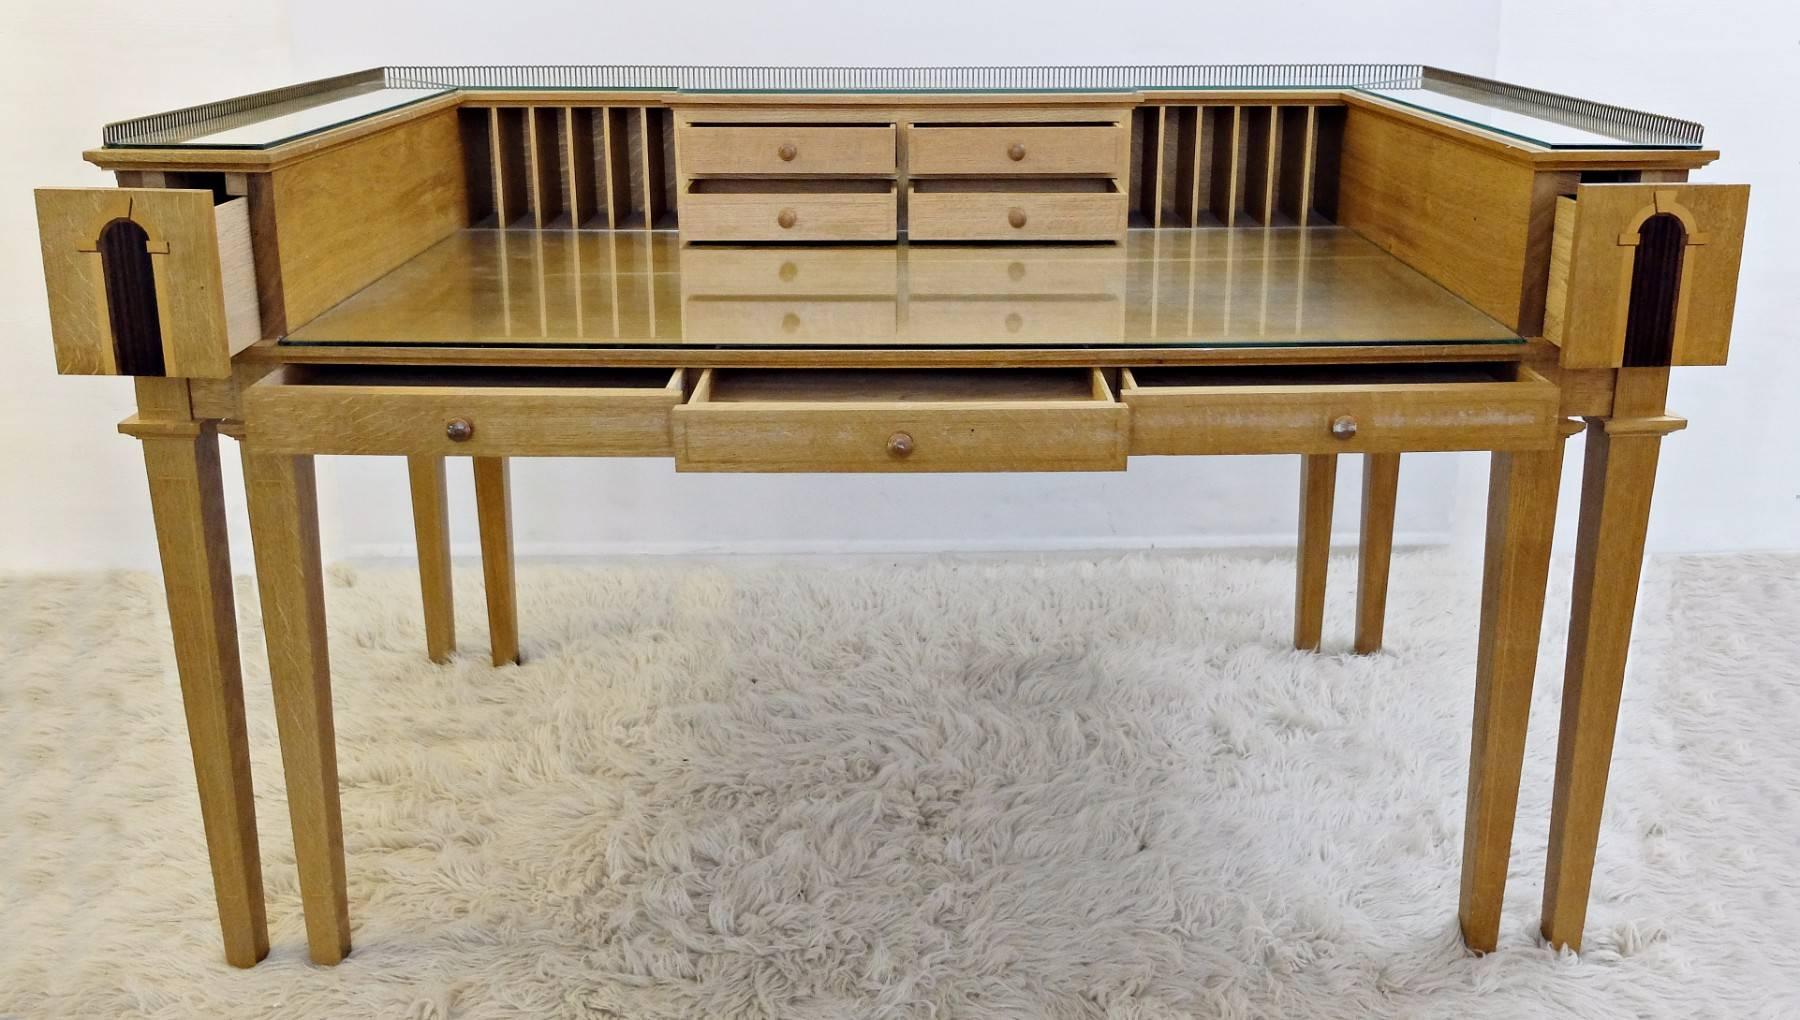 20th Century Writing Desk Designed by David Linley in 1991